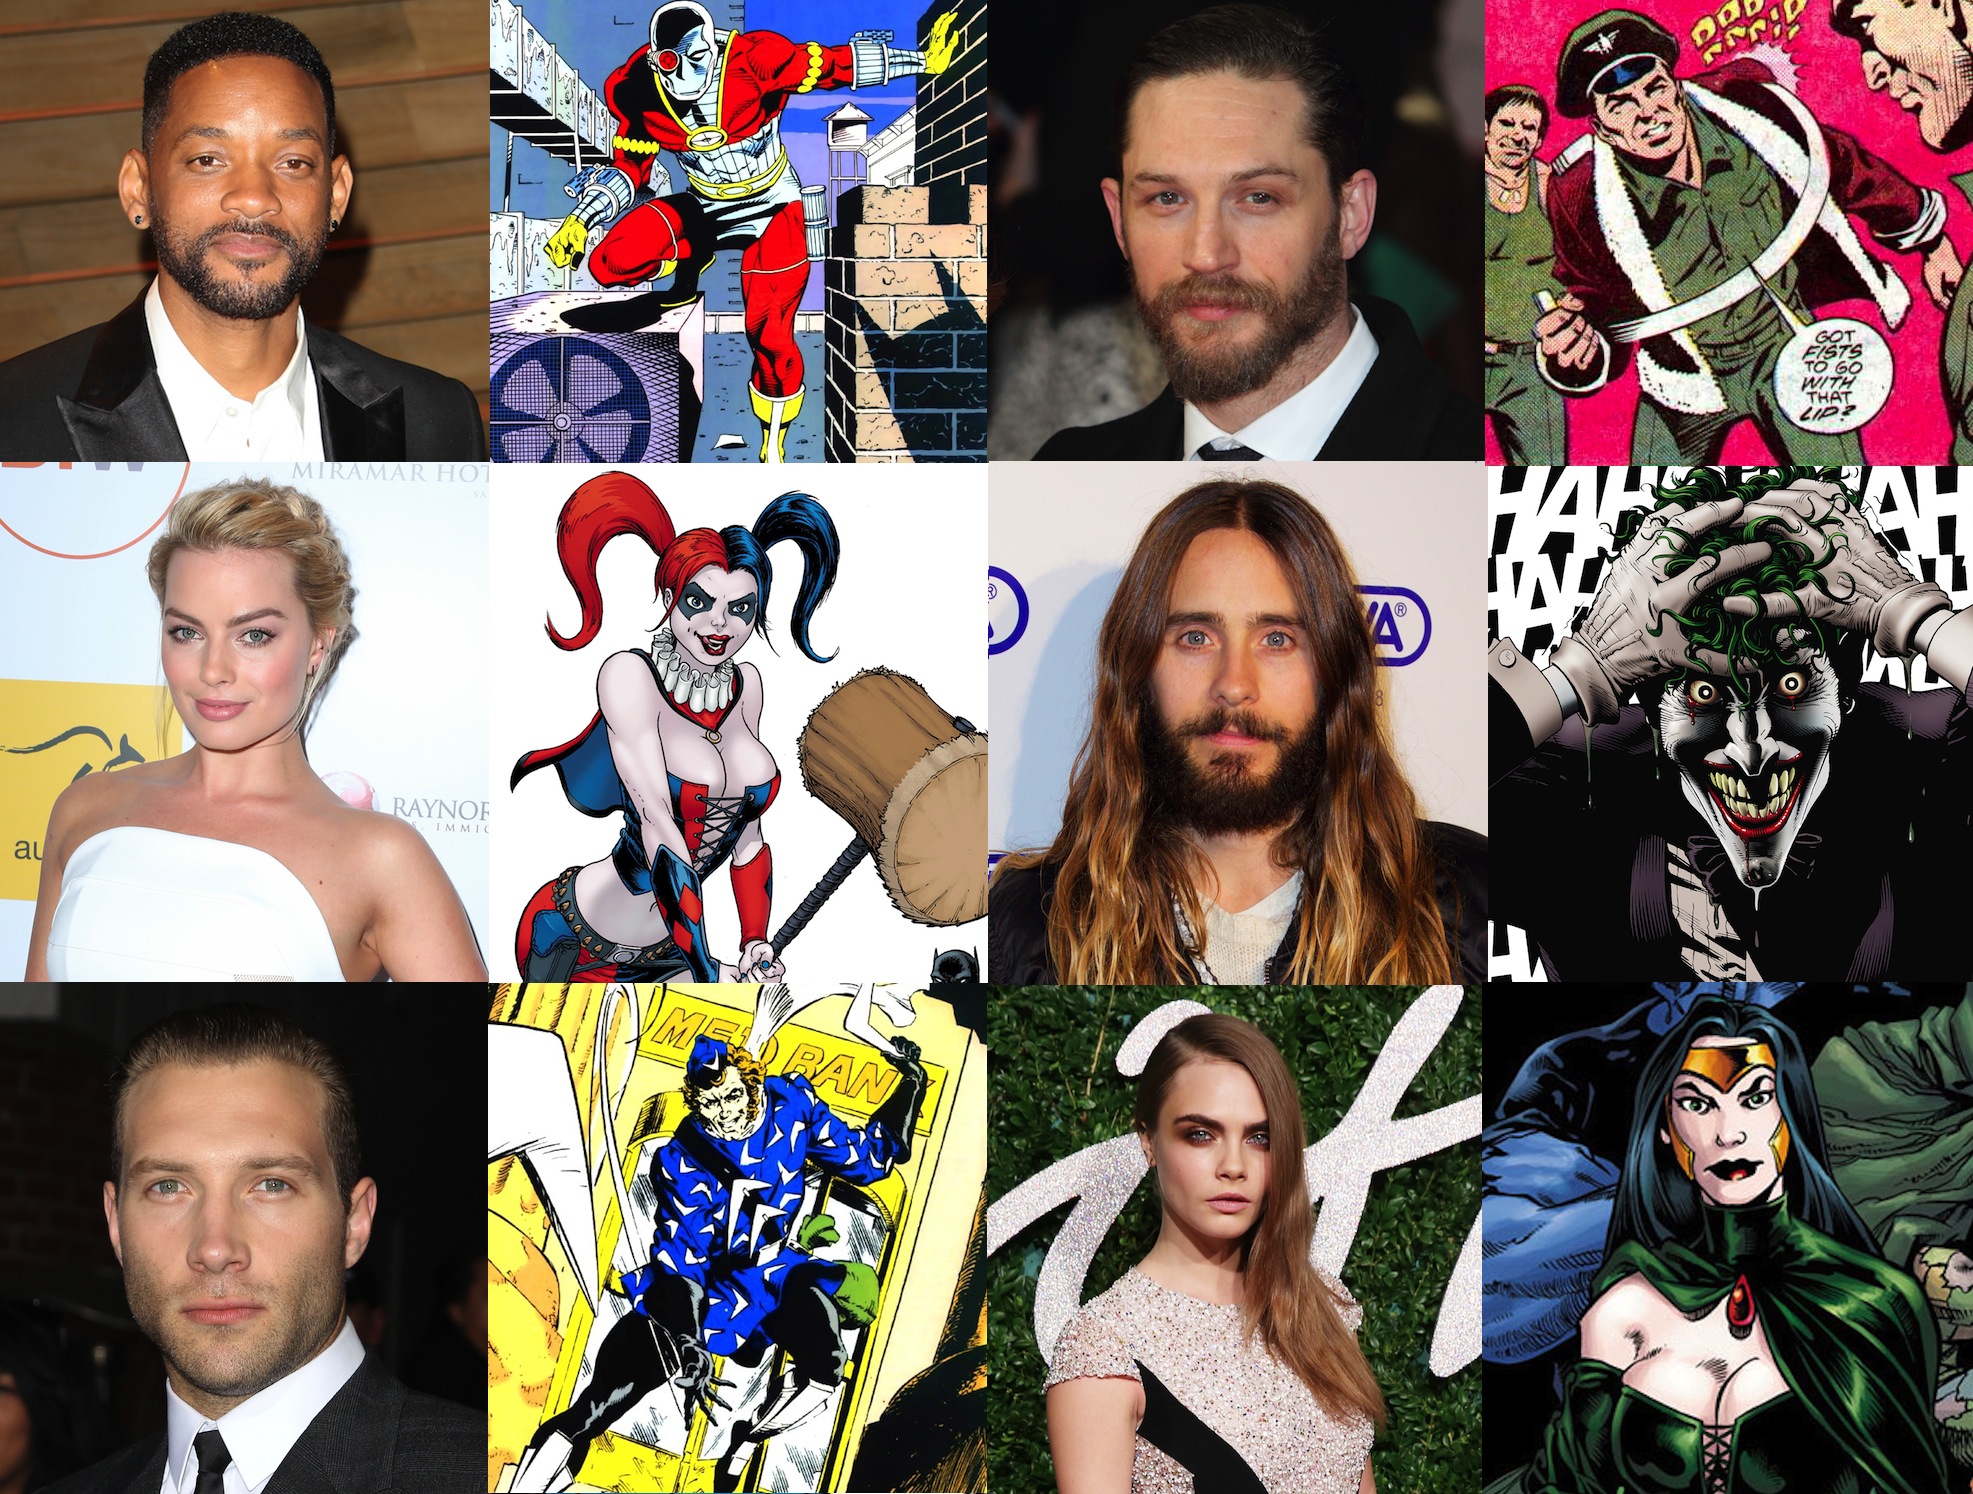 Suicide Squad Cast: Jared Leto as Joker, Will Smith is Deadshot